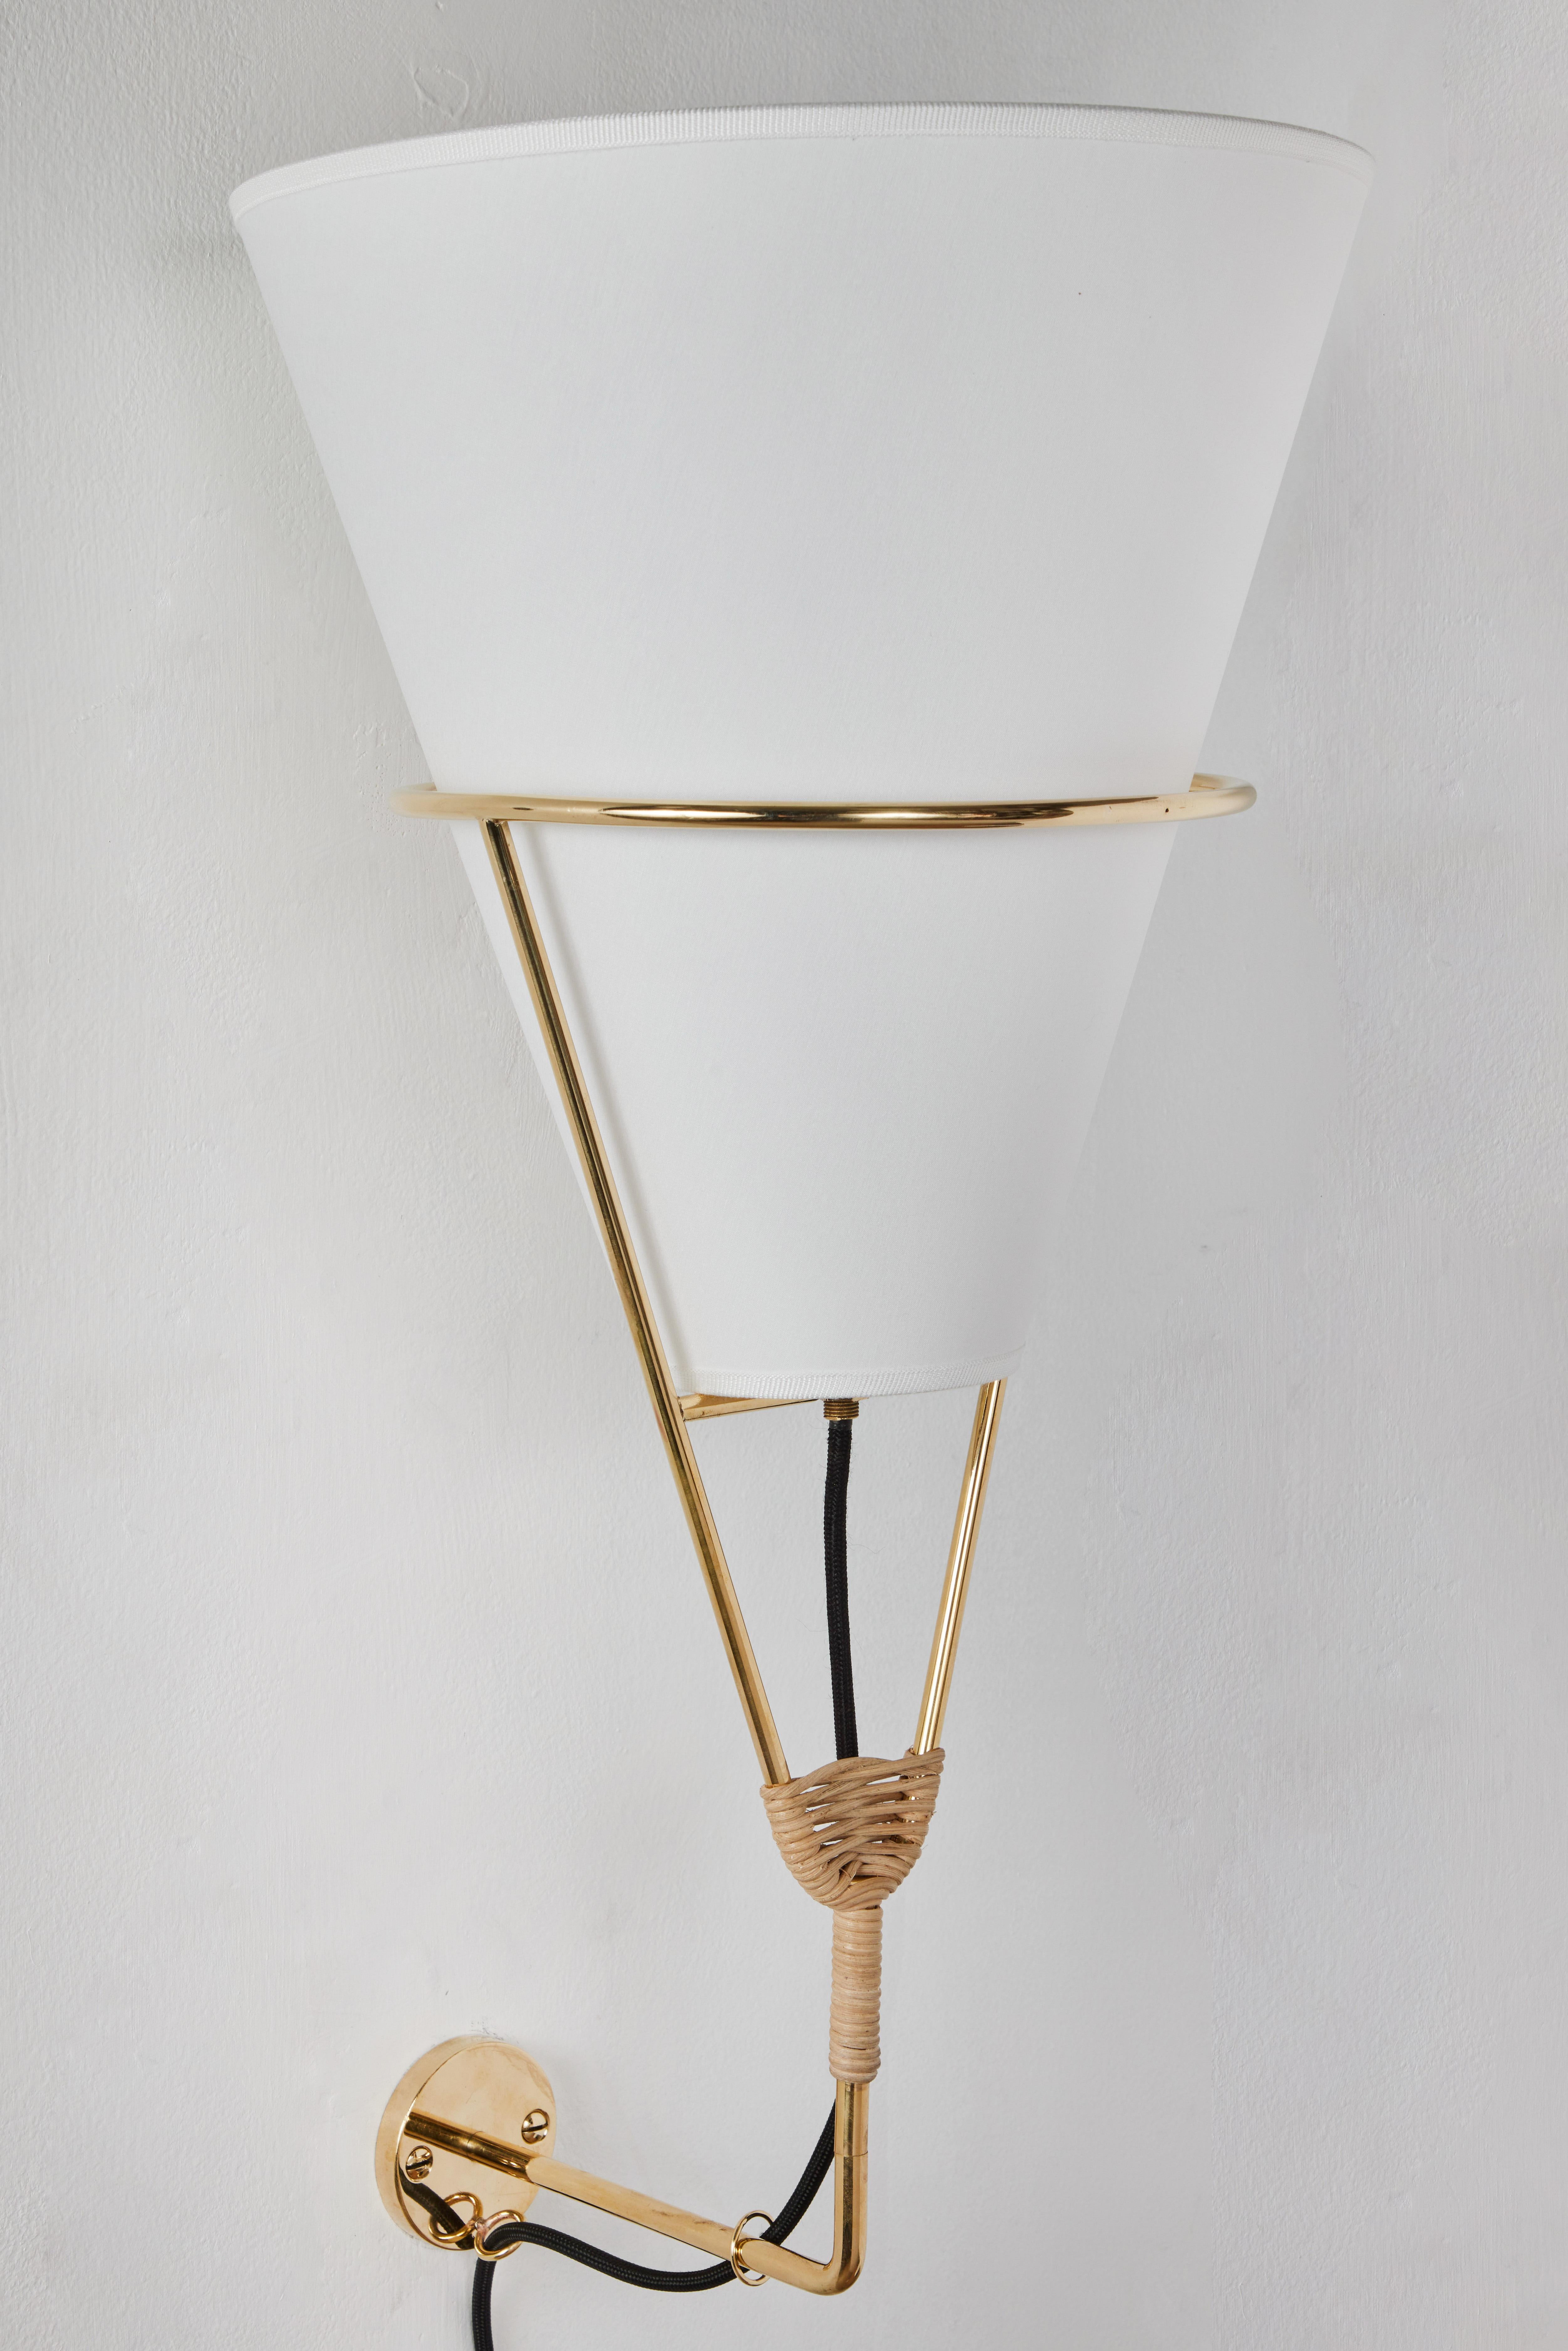 Large Carl Auböck 'Vice Versa' wall lamp. A newly designed variant exclusive to Two Enlighten based on the iconic Vice Versa table and floor lamp series designed by Carl Auböck III in the 1950s. Executed in polished brass and hand woven wicker with